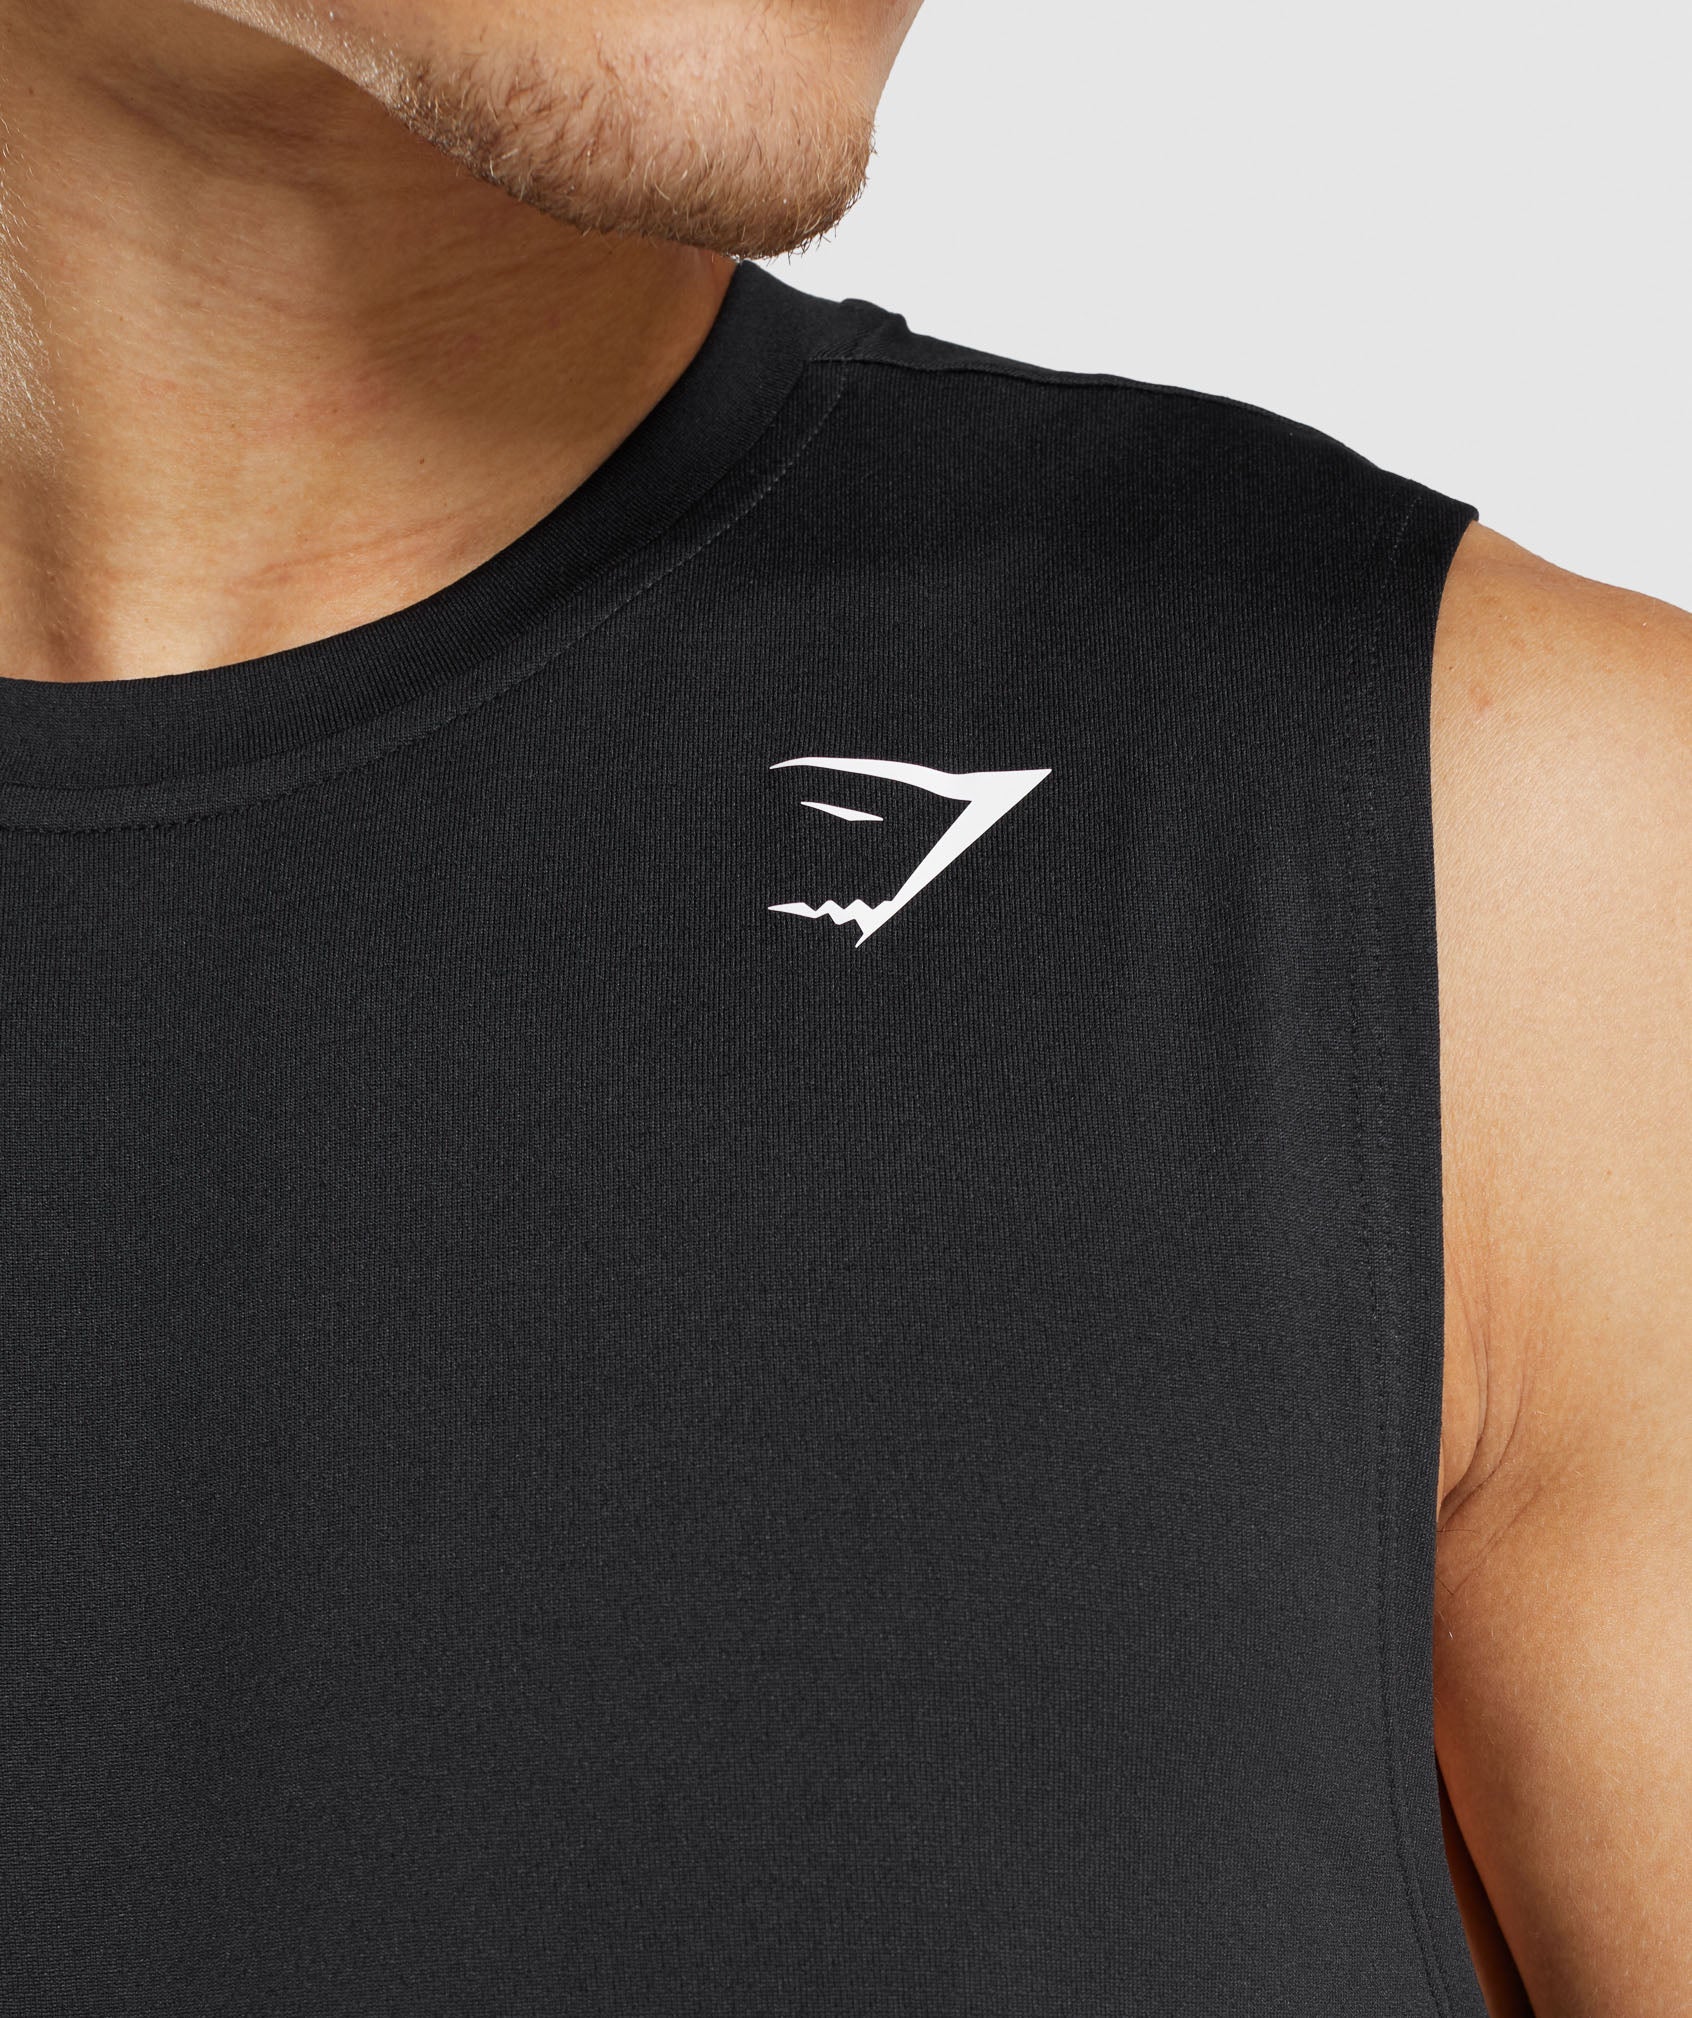 Arrival Sleeveless T-Shirt in Black - view 5